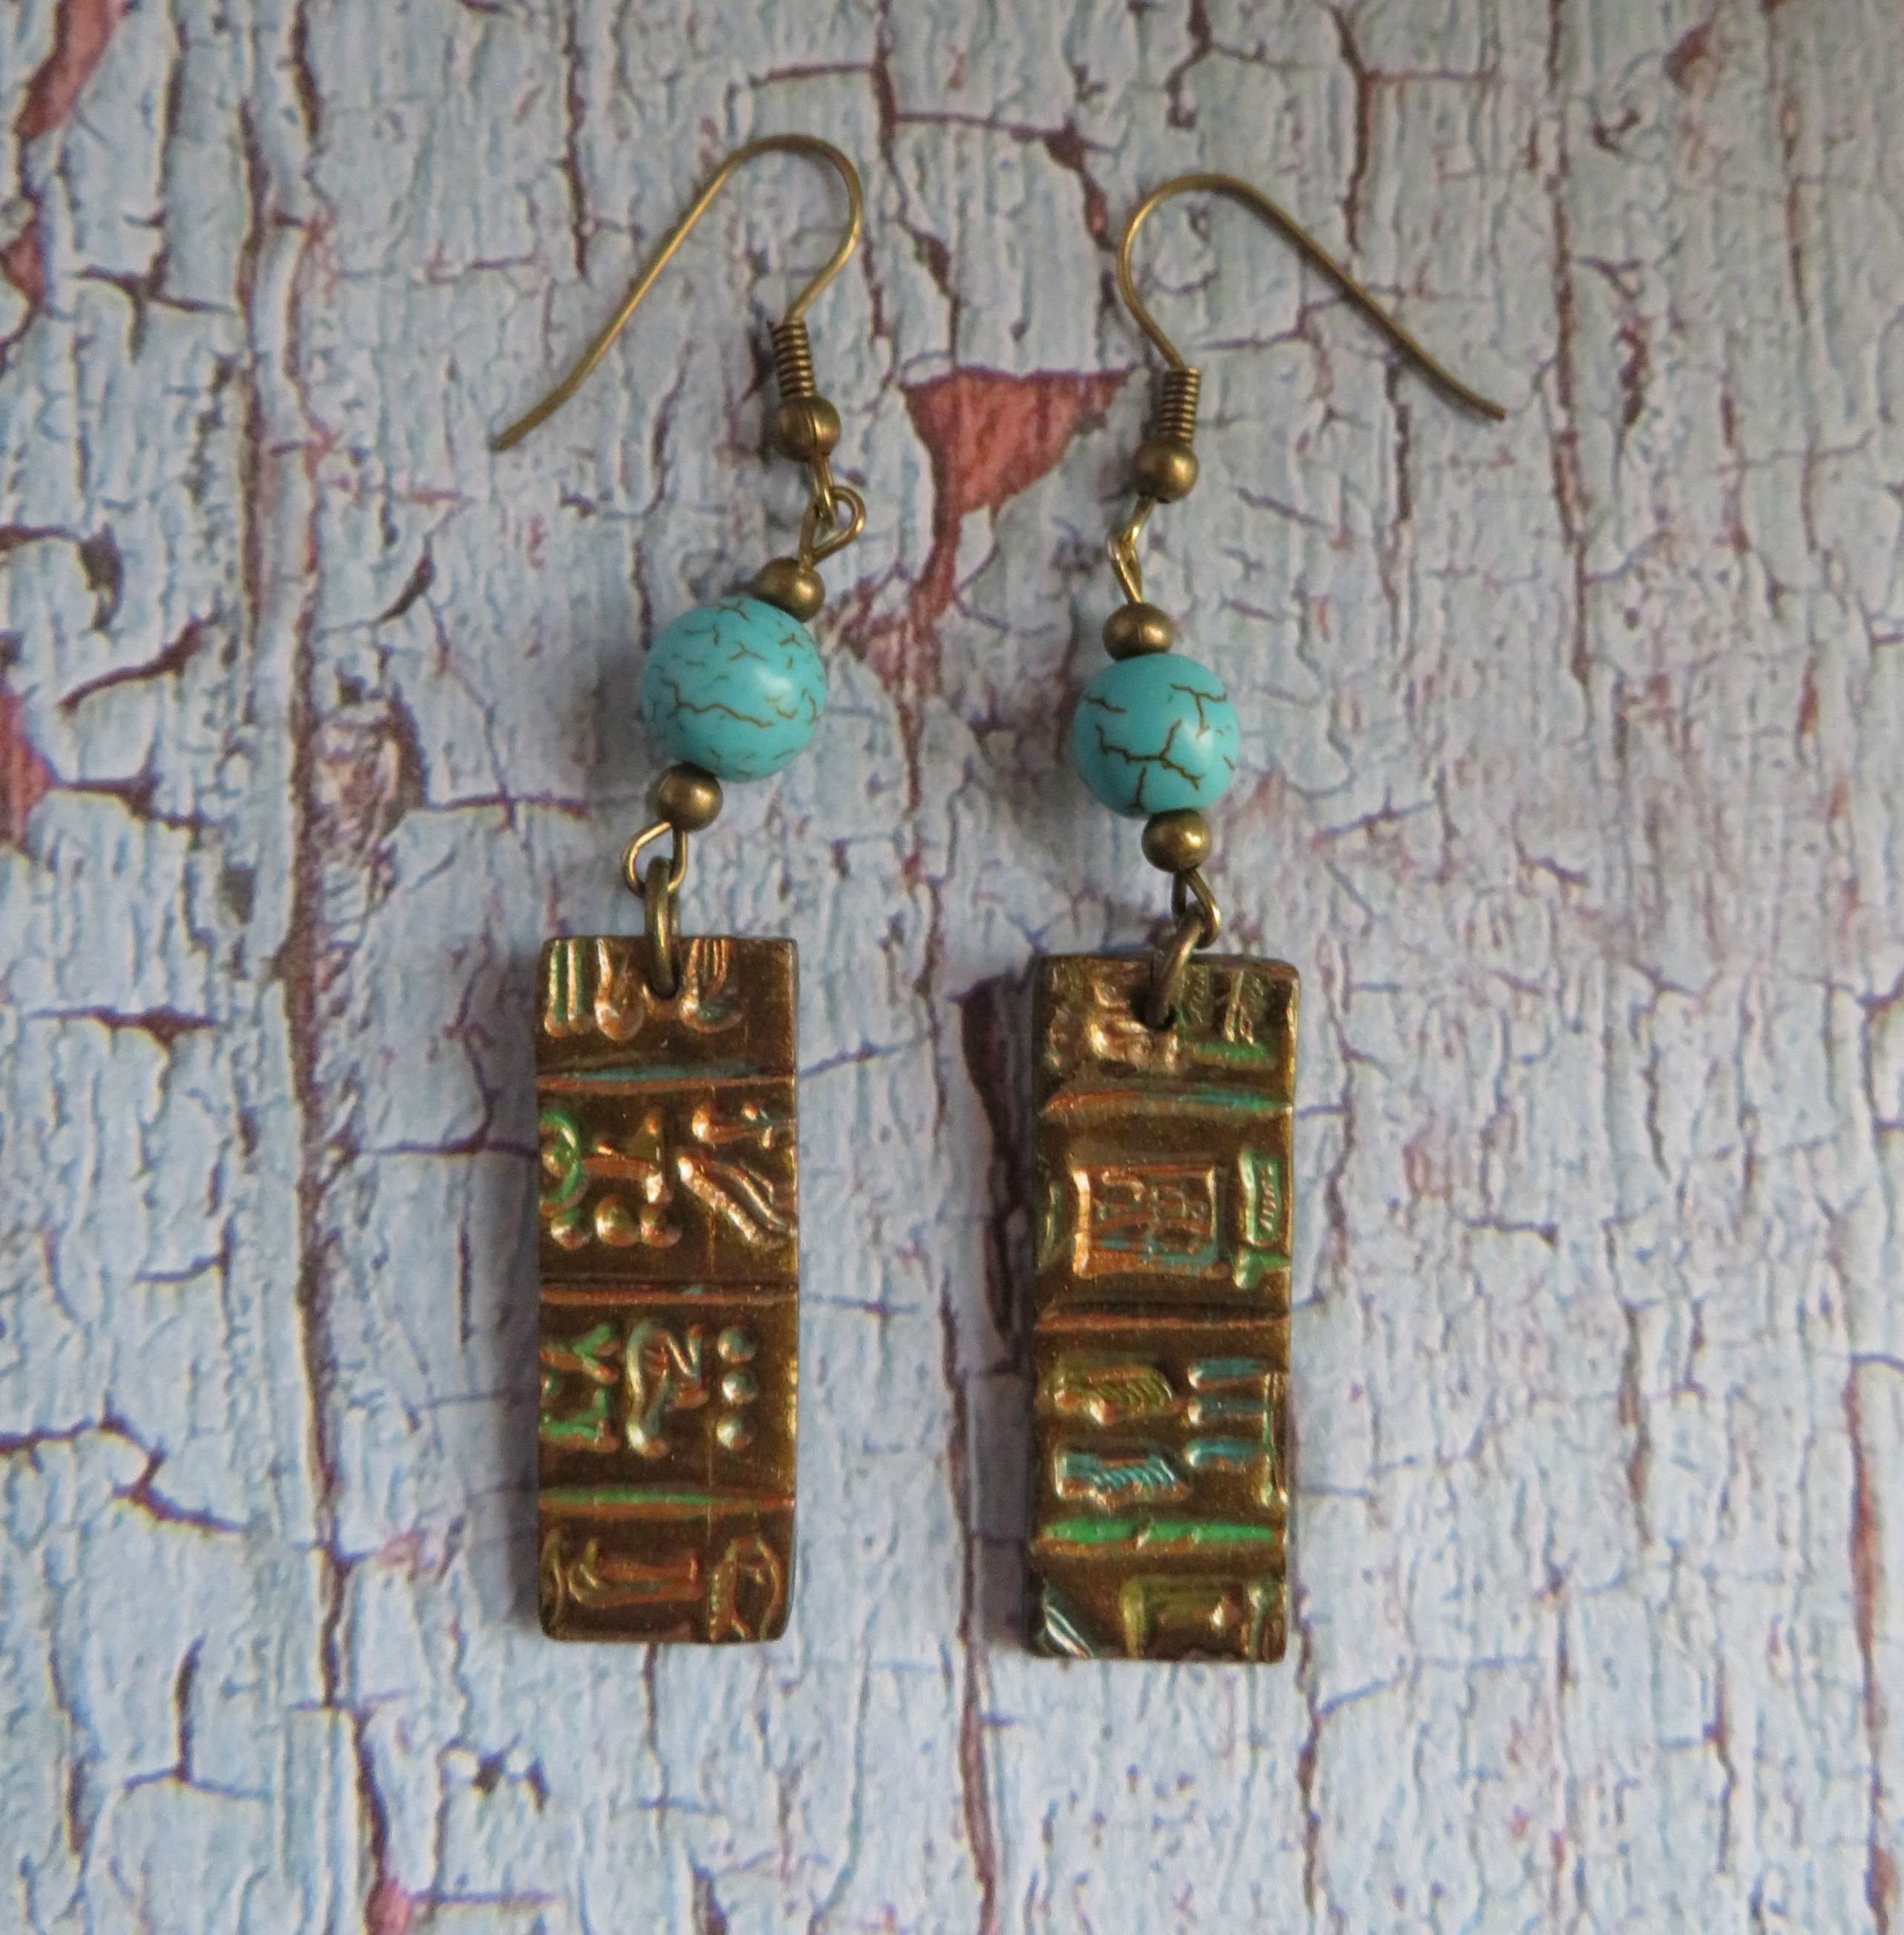 Ancient Egyptian Earring, Antique Gold Imitation Earrings ...